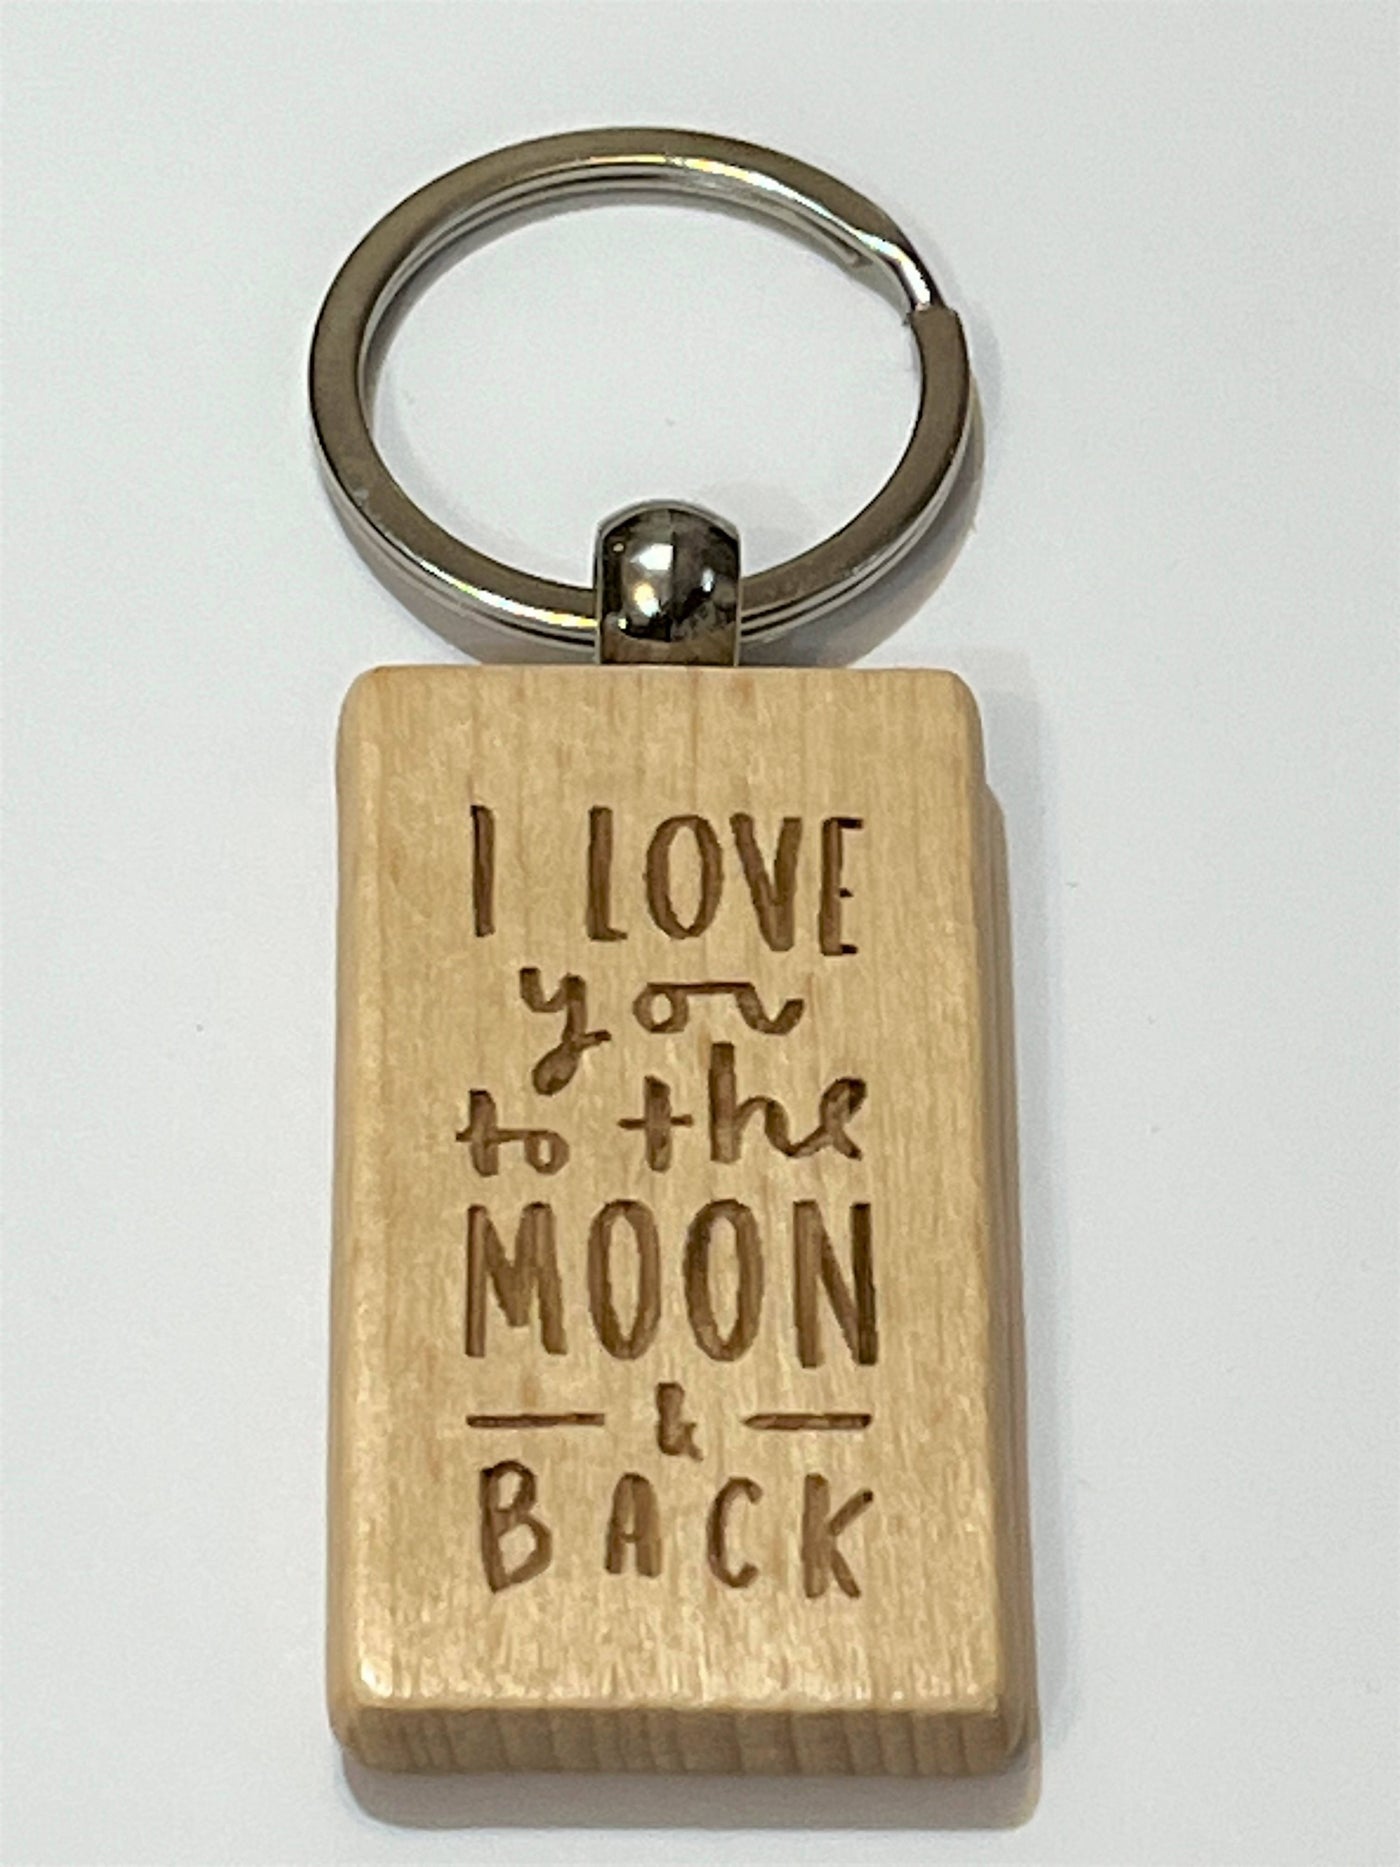 To the Moon & Back Keychain